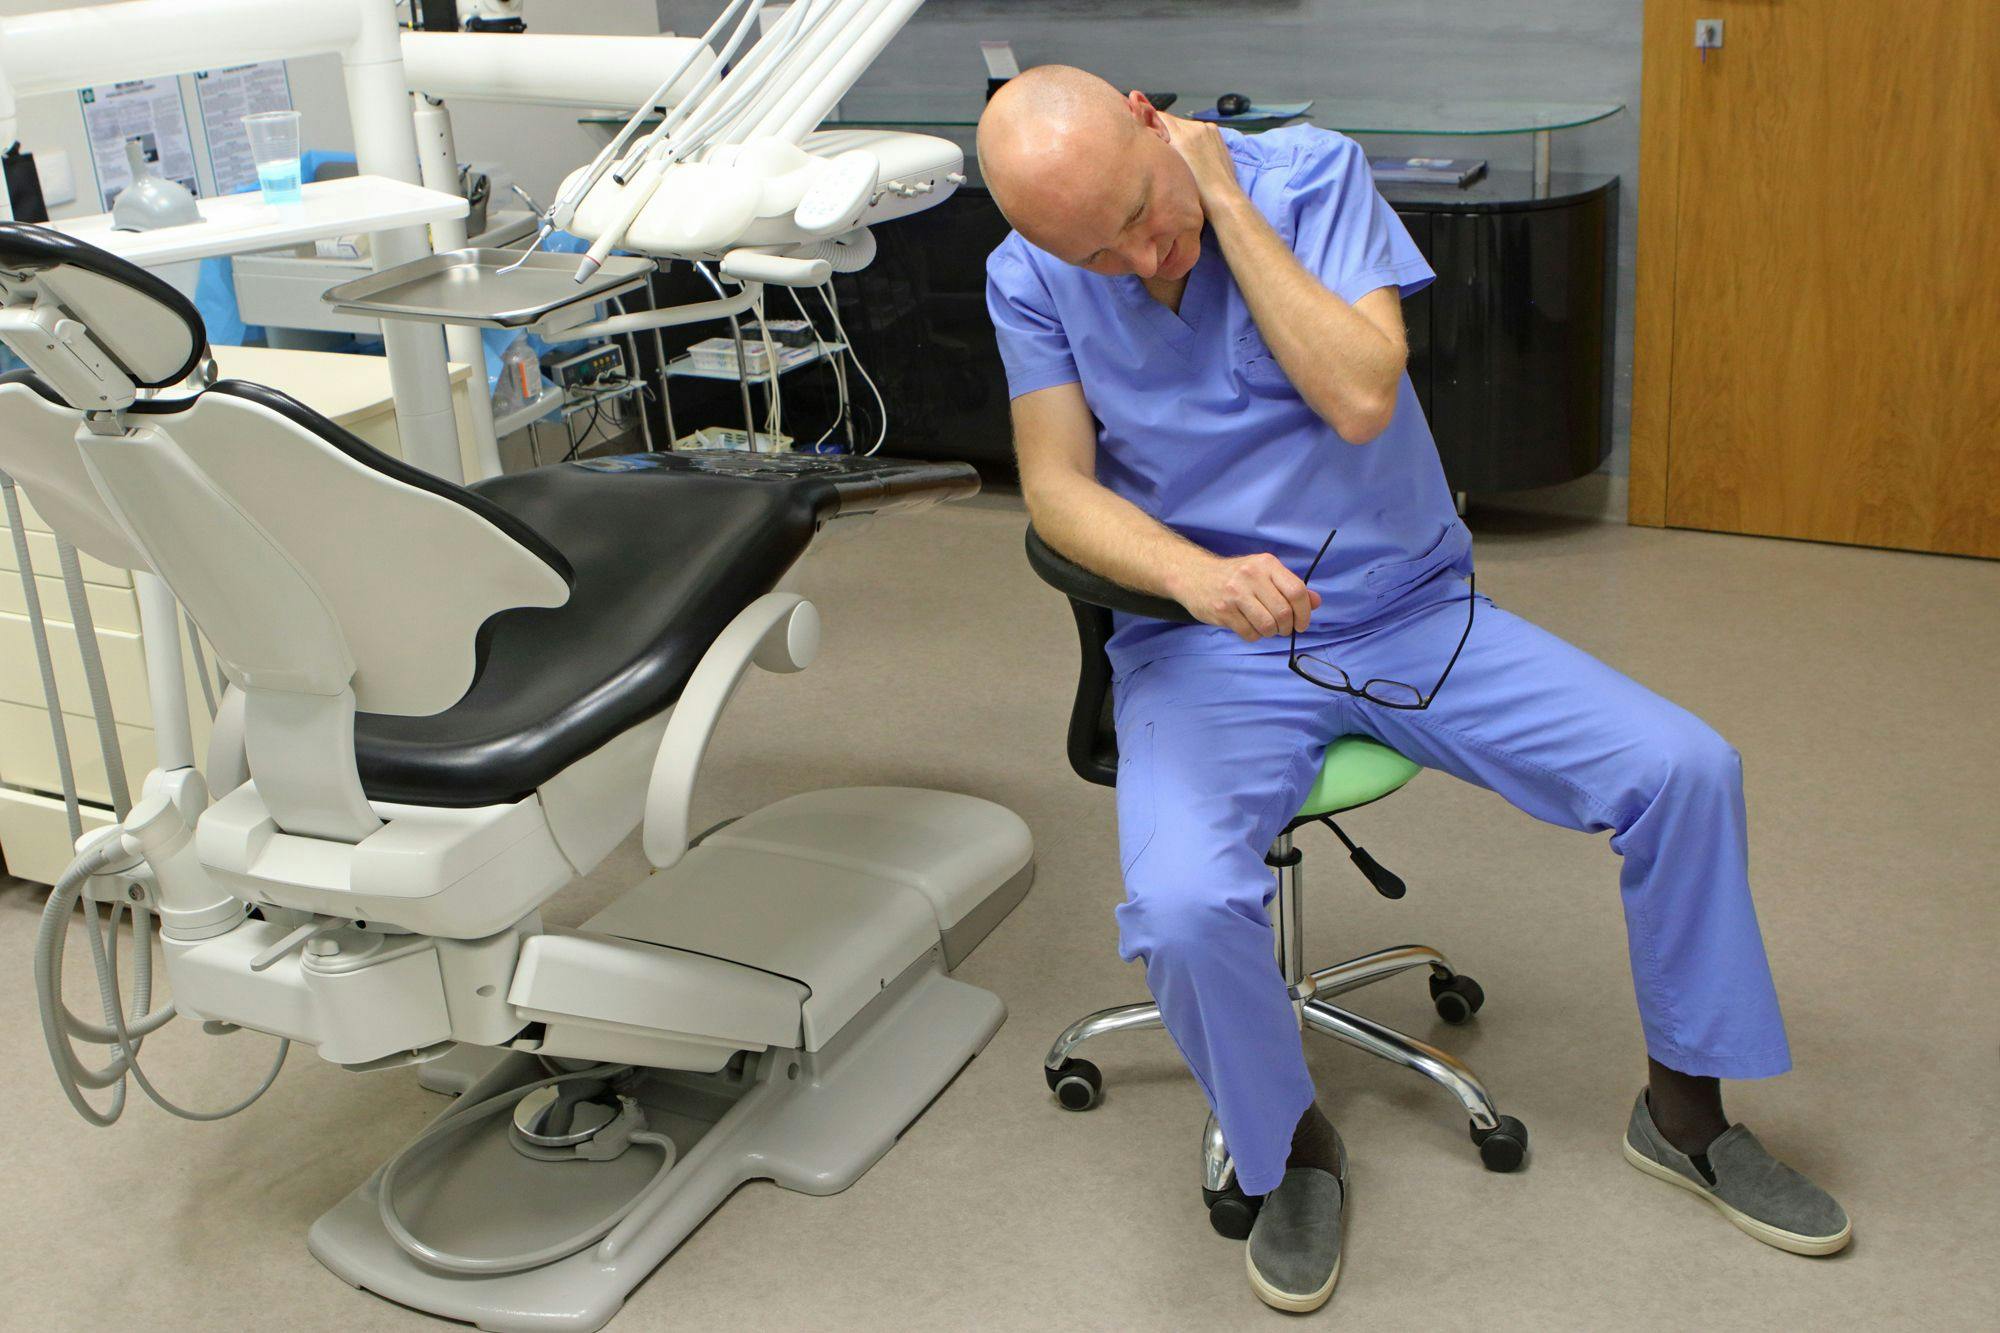 Managing Stress While Working in a Dental Practice | Image Credit: © endostock - stock.adobe.com.